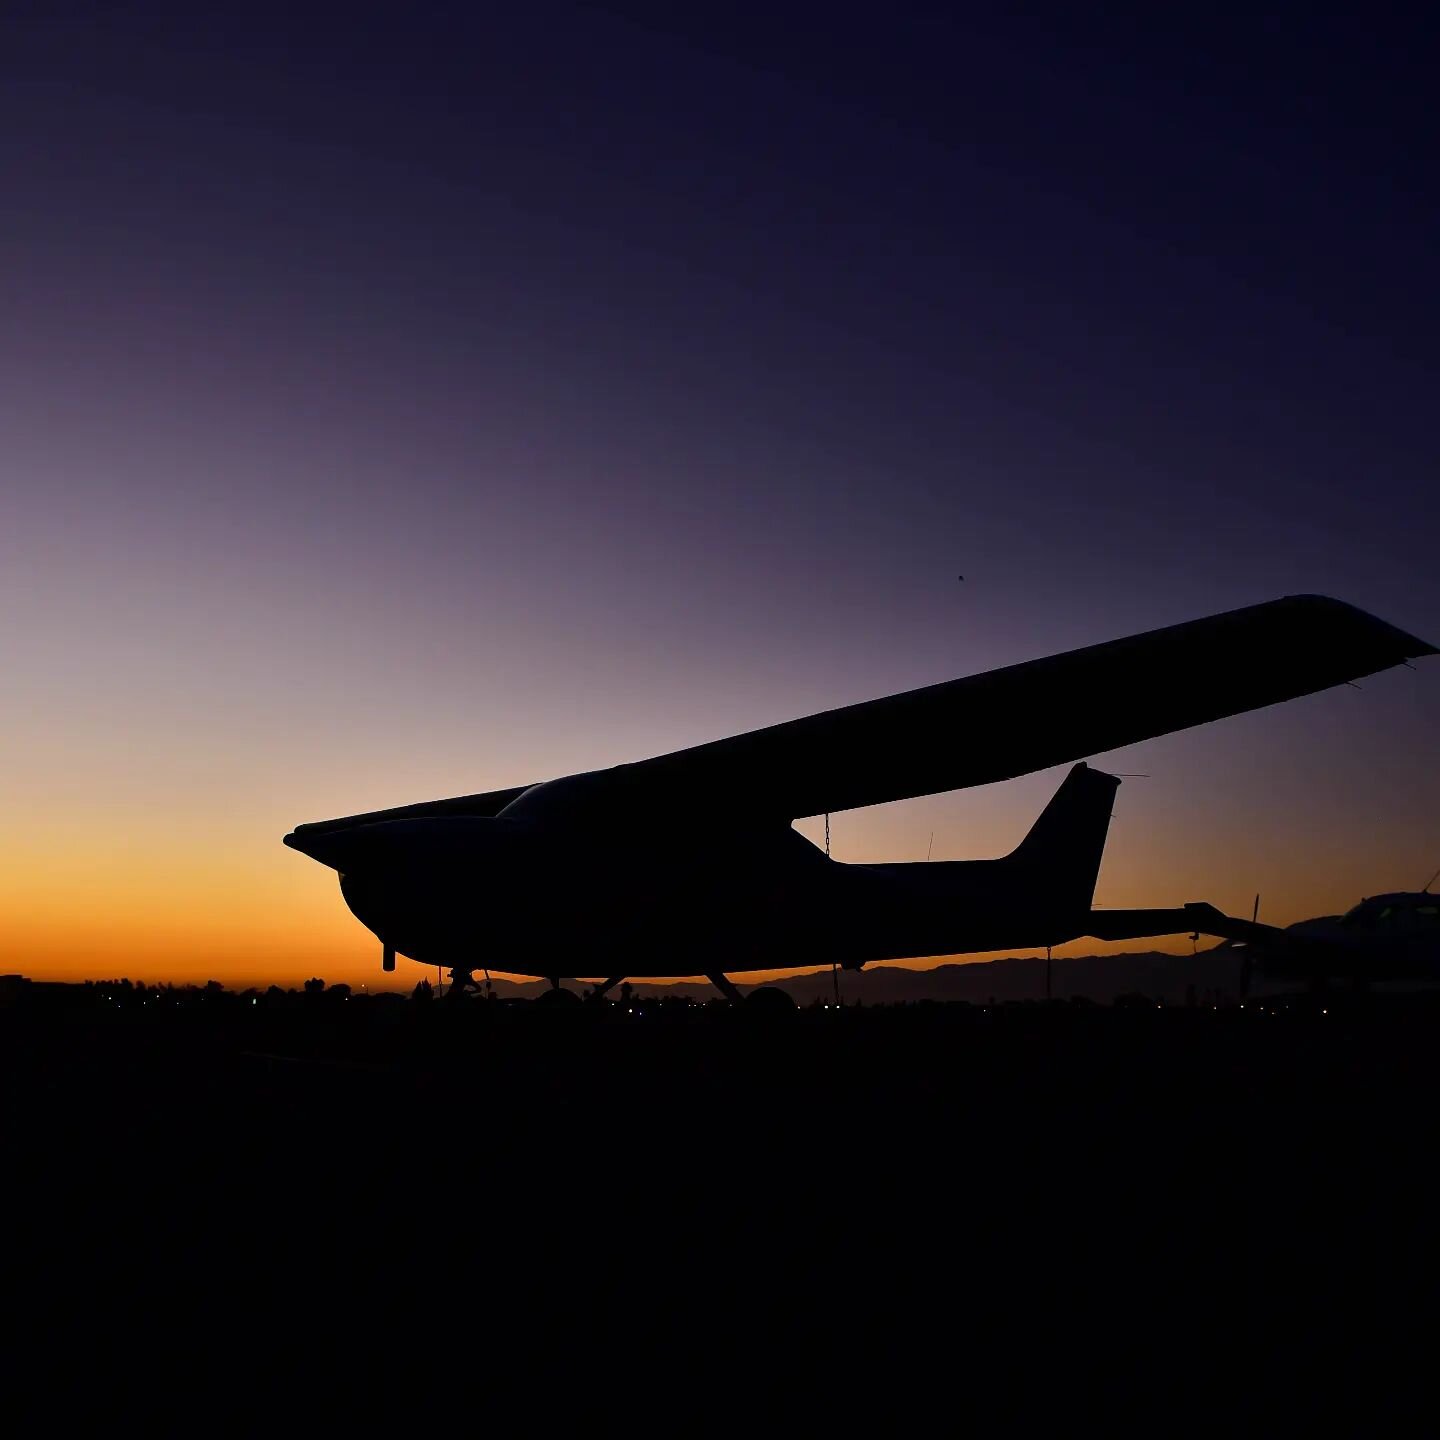 With the sun setting just past 5pm PST it's a good time to get your Night requirements done. 🌜

#californiaaviationservices #nightflight #flightschool #learntofly #asel #ppl #cessna172 #cessna #cessna150 #cessna172rg #riversidemunicipalairport #kral